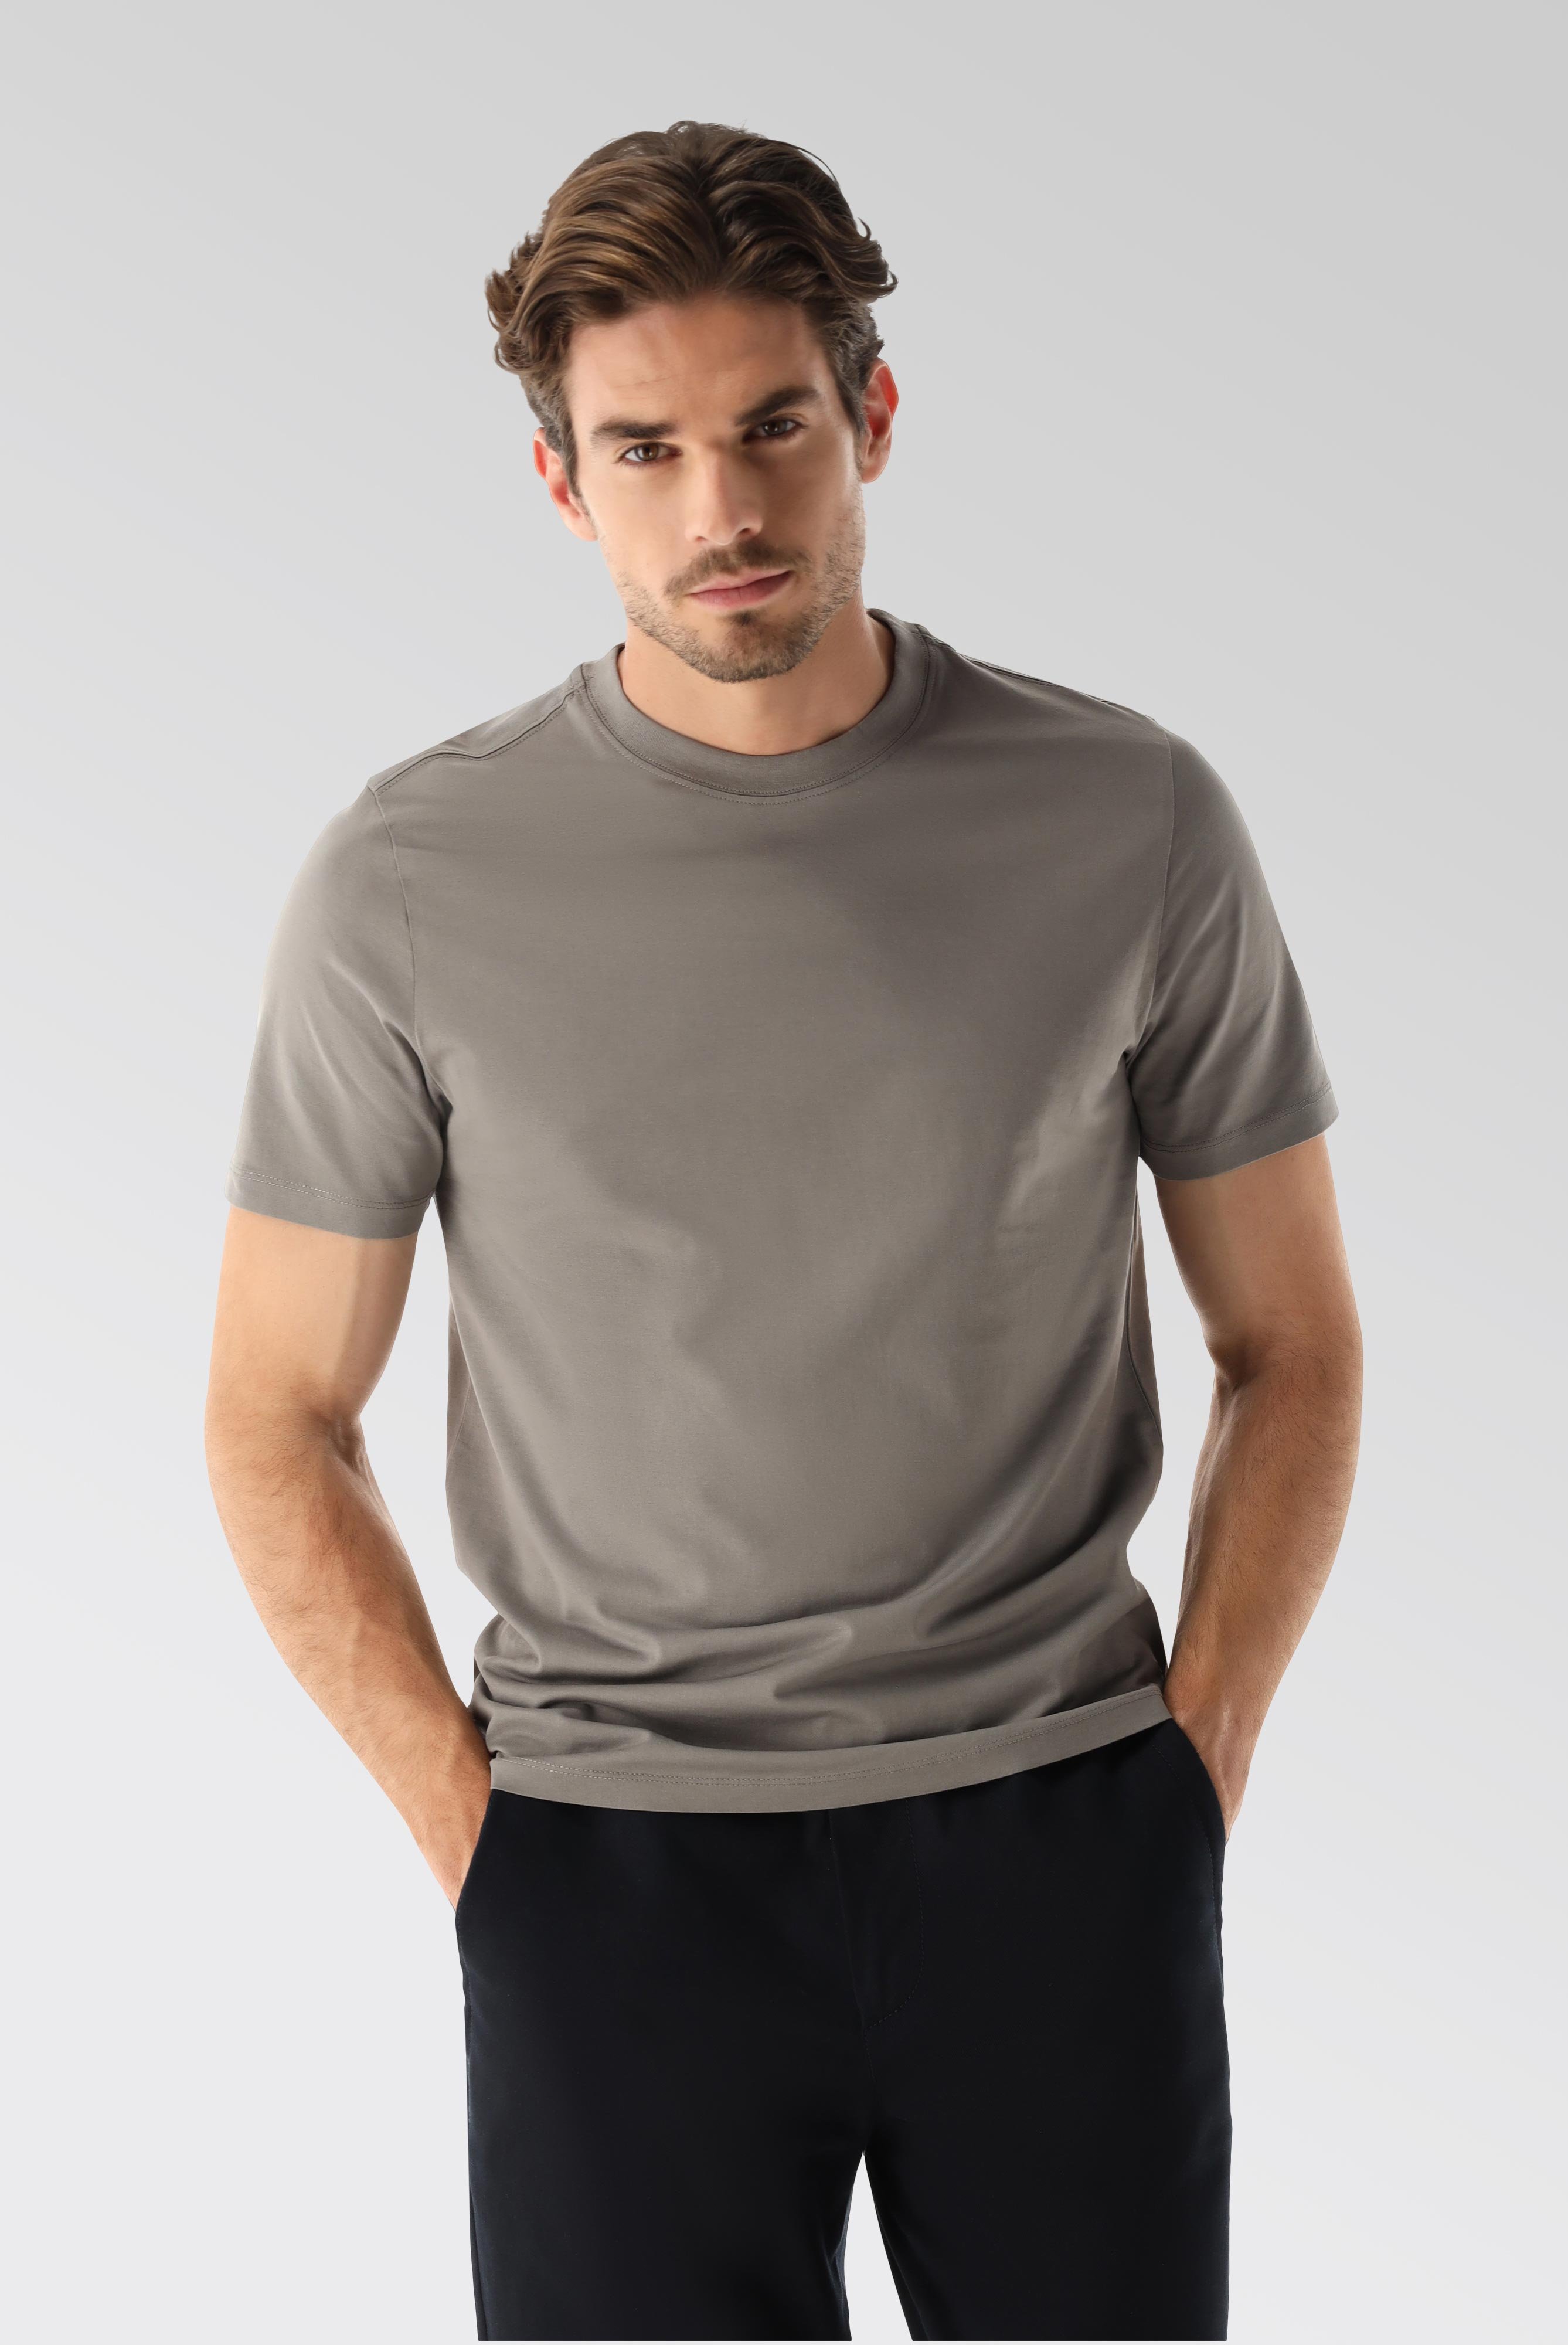 T-Shirts+Relaxed Fit Crew Neck Jersey T-Shirt+20.1660..Z20044.060.S